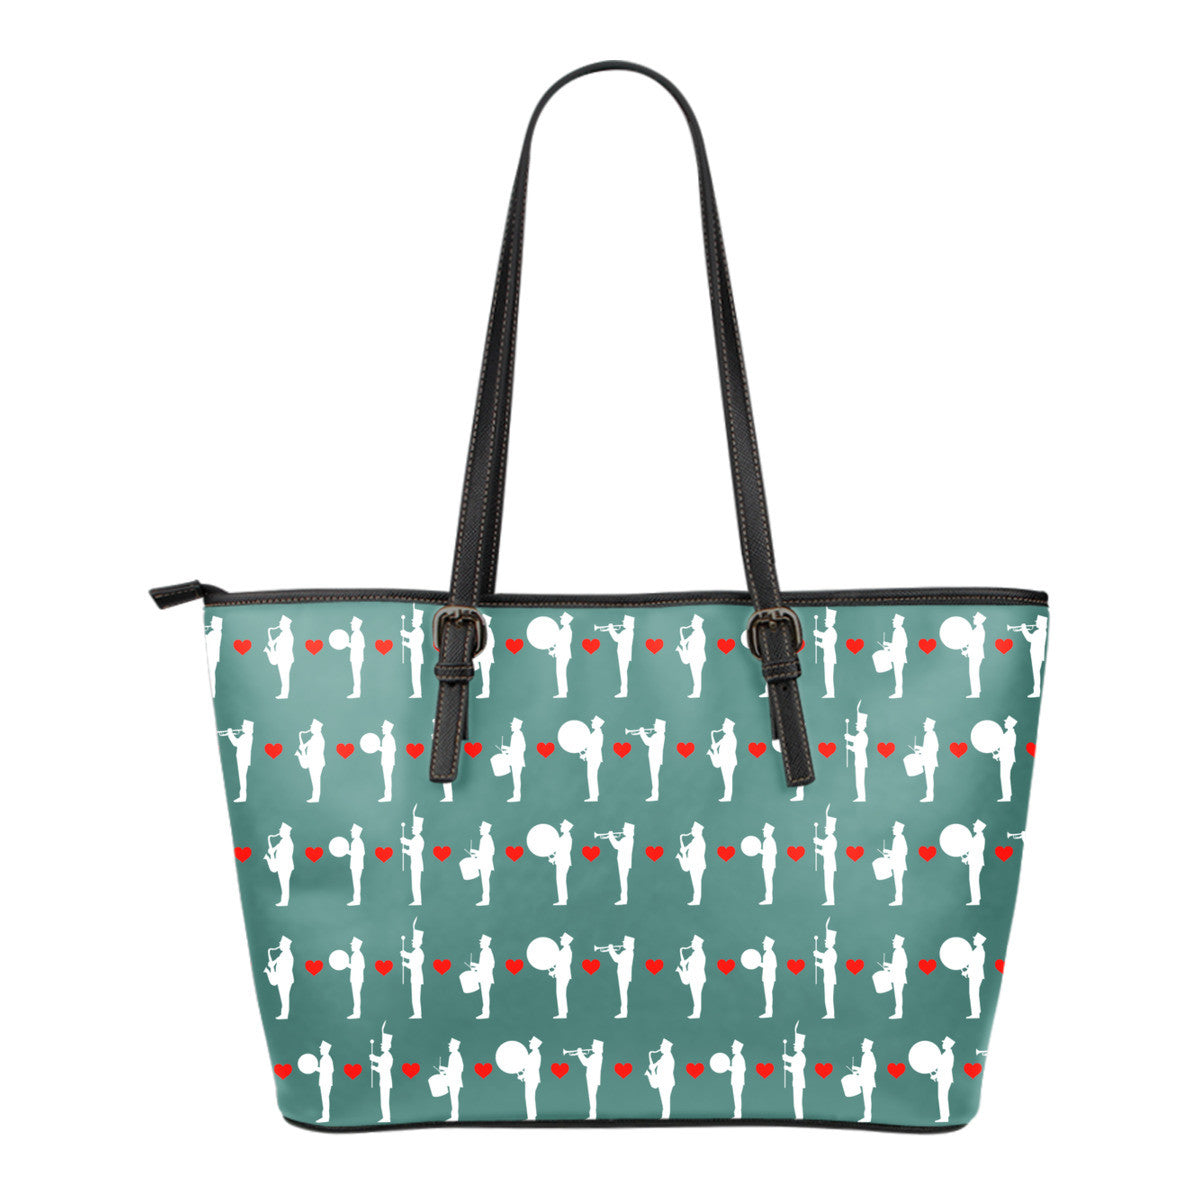 Marching Band Pattern Tote Bag